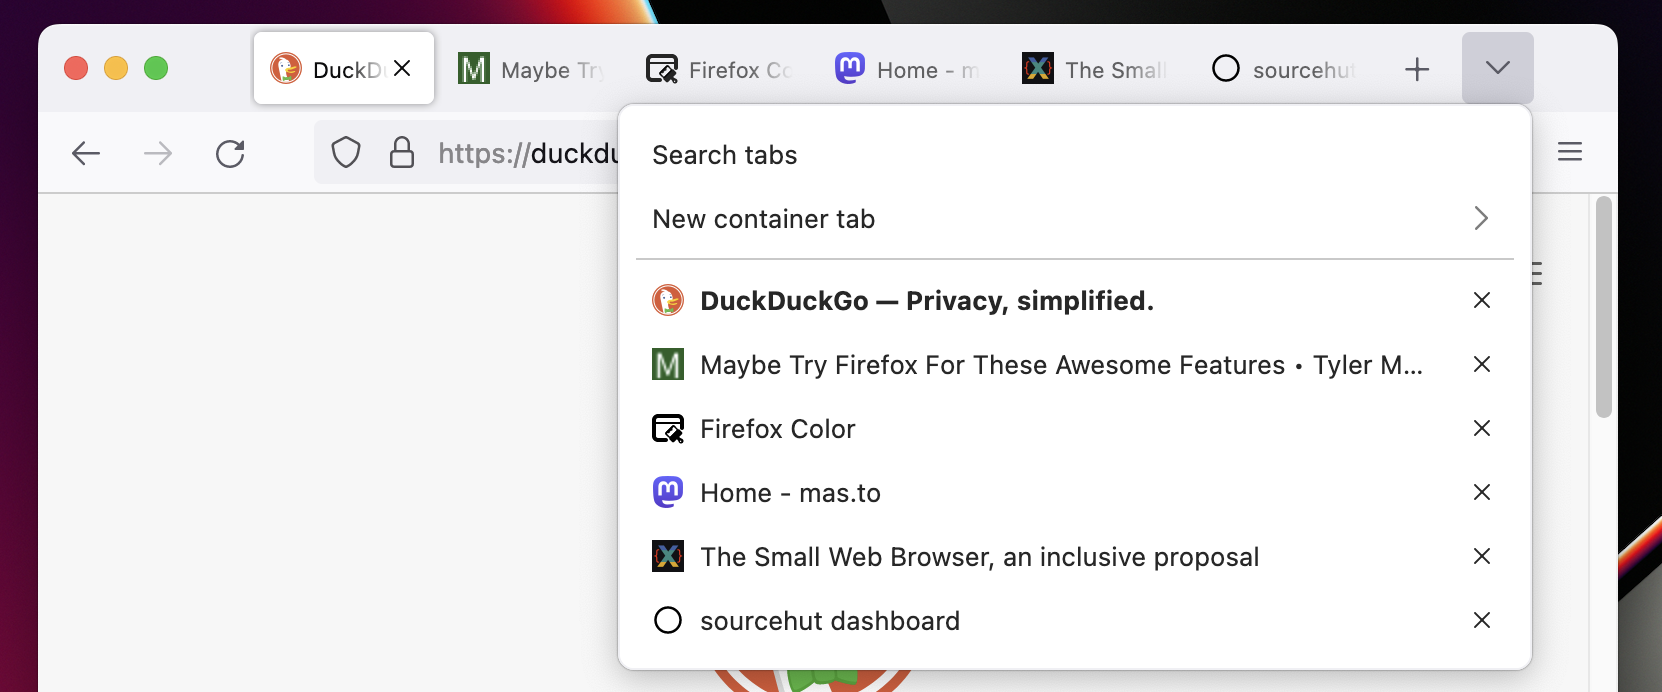 Screenshot of six browser tabs. The tab bar is full, but the tab dropdown shows the full titles of each tab clearly.